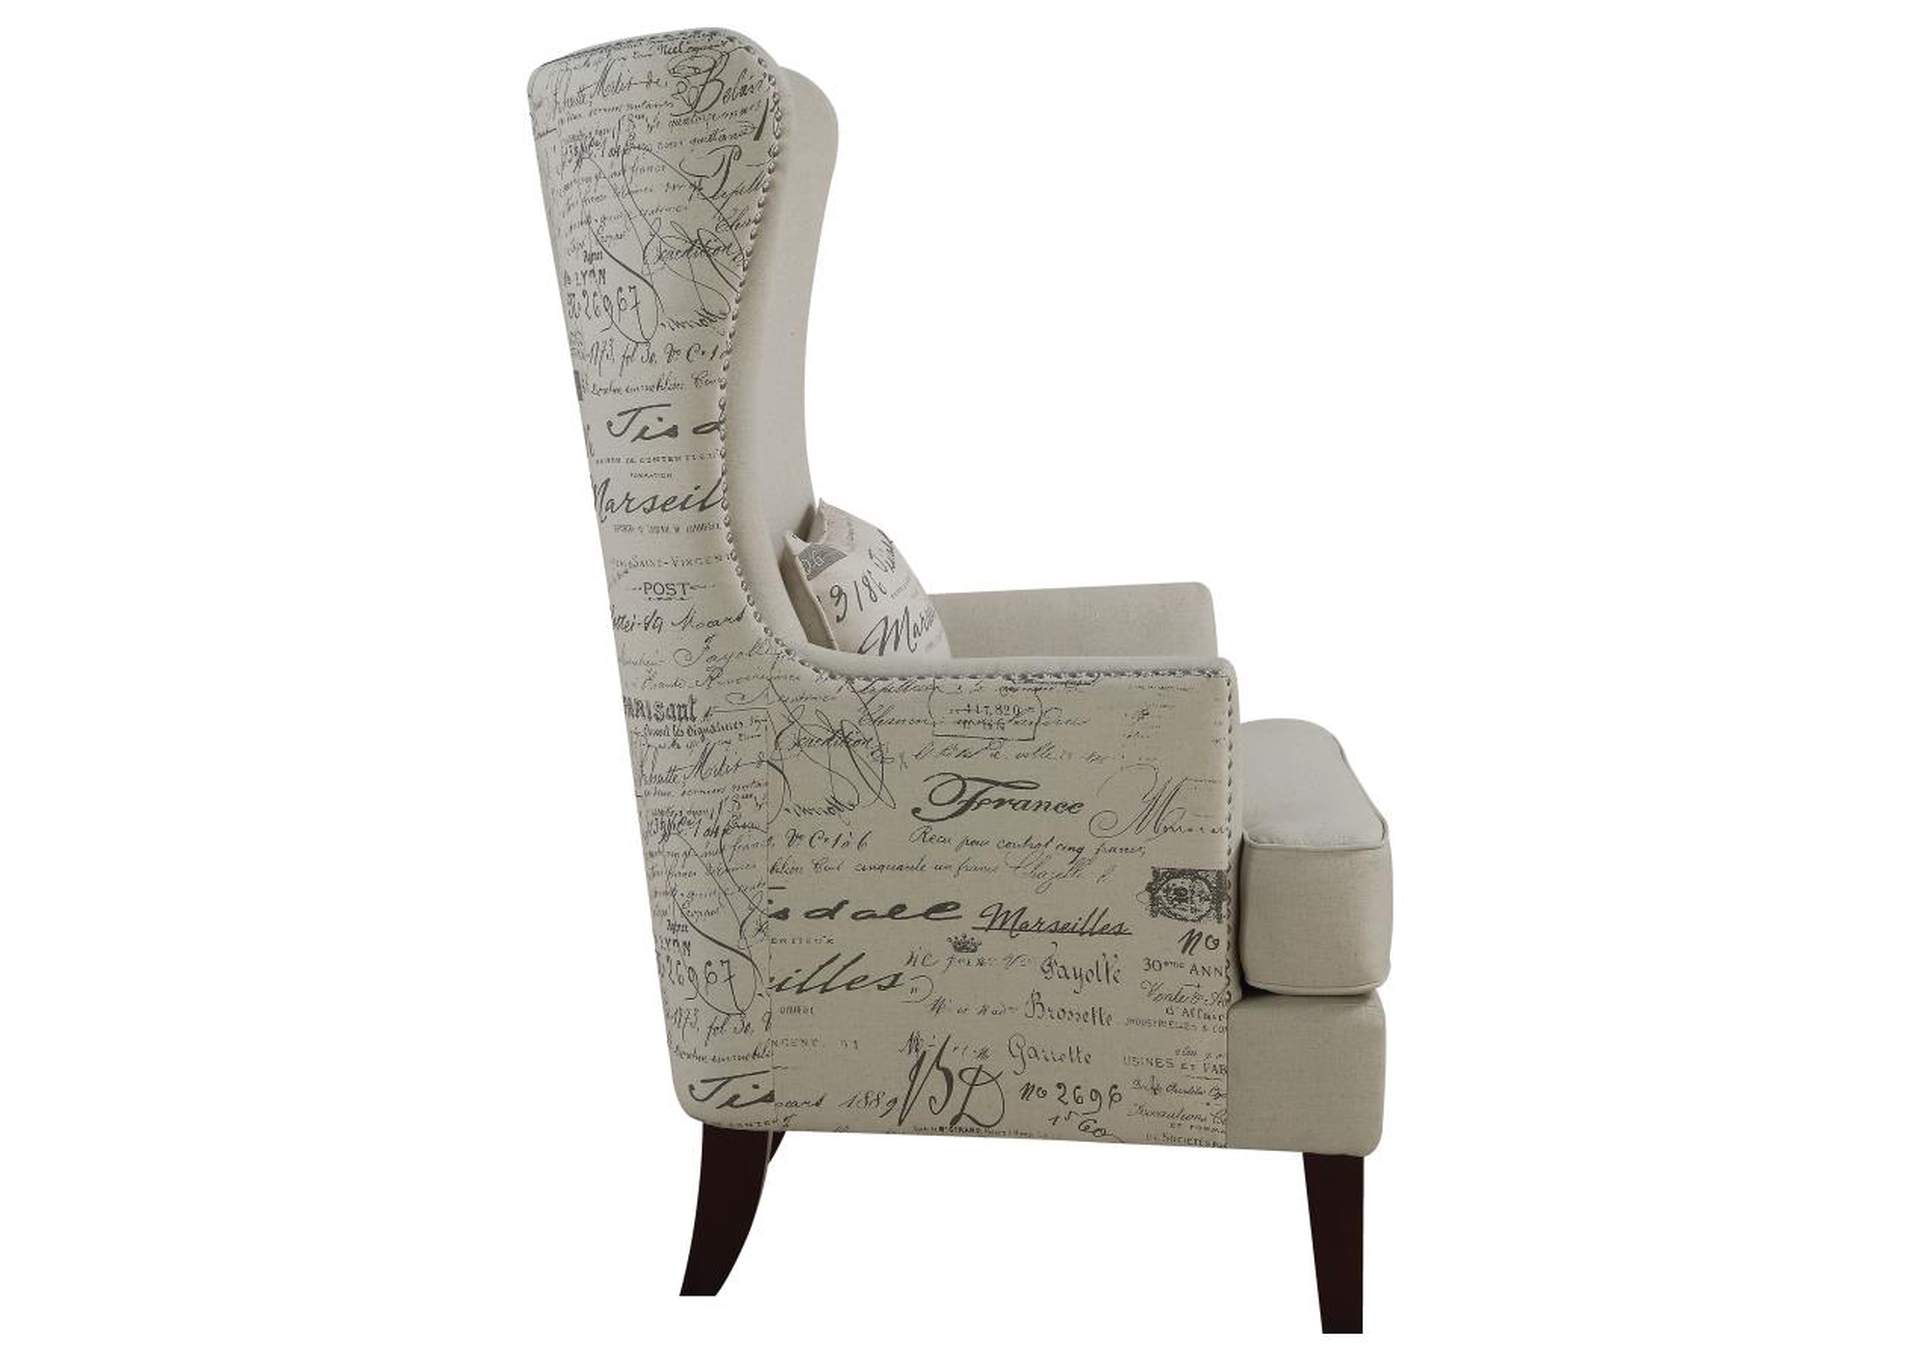 Pippin Curved Arm High Back Accent Chair Cream,Coaster Furniture